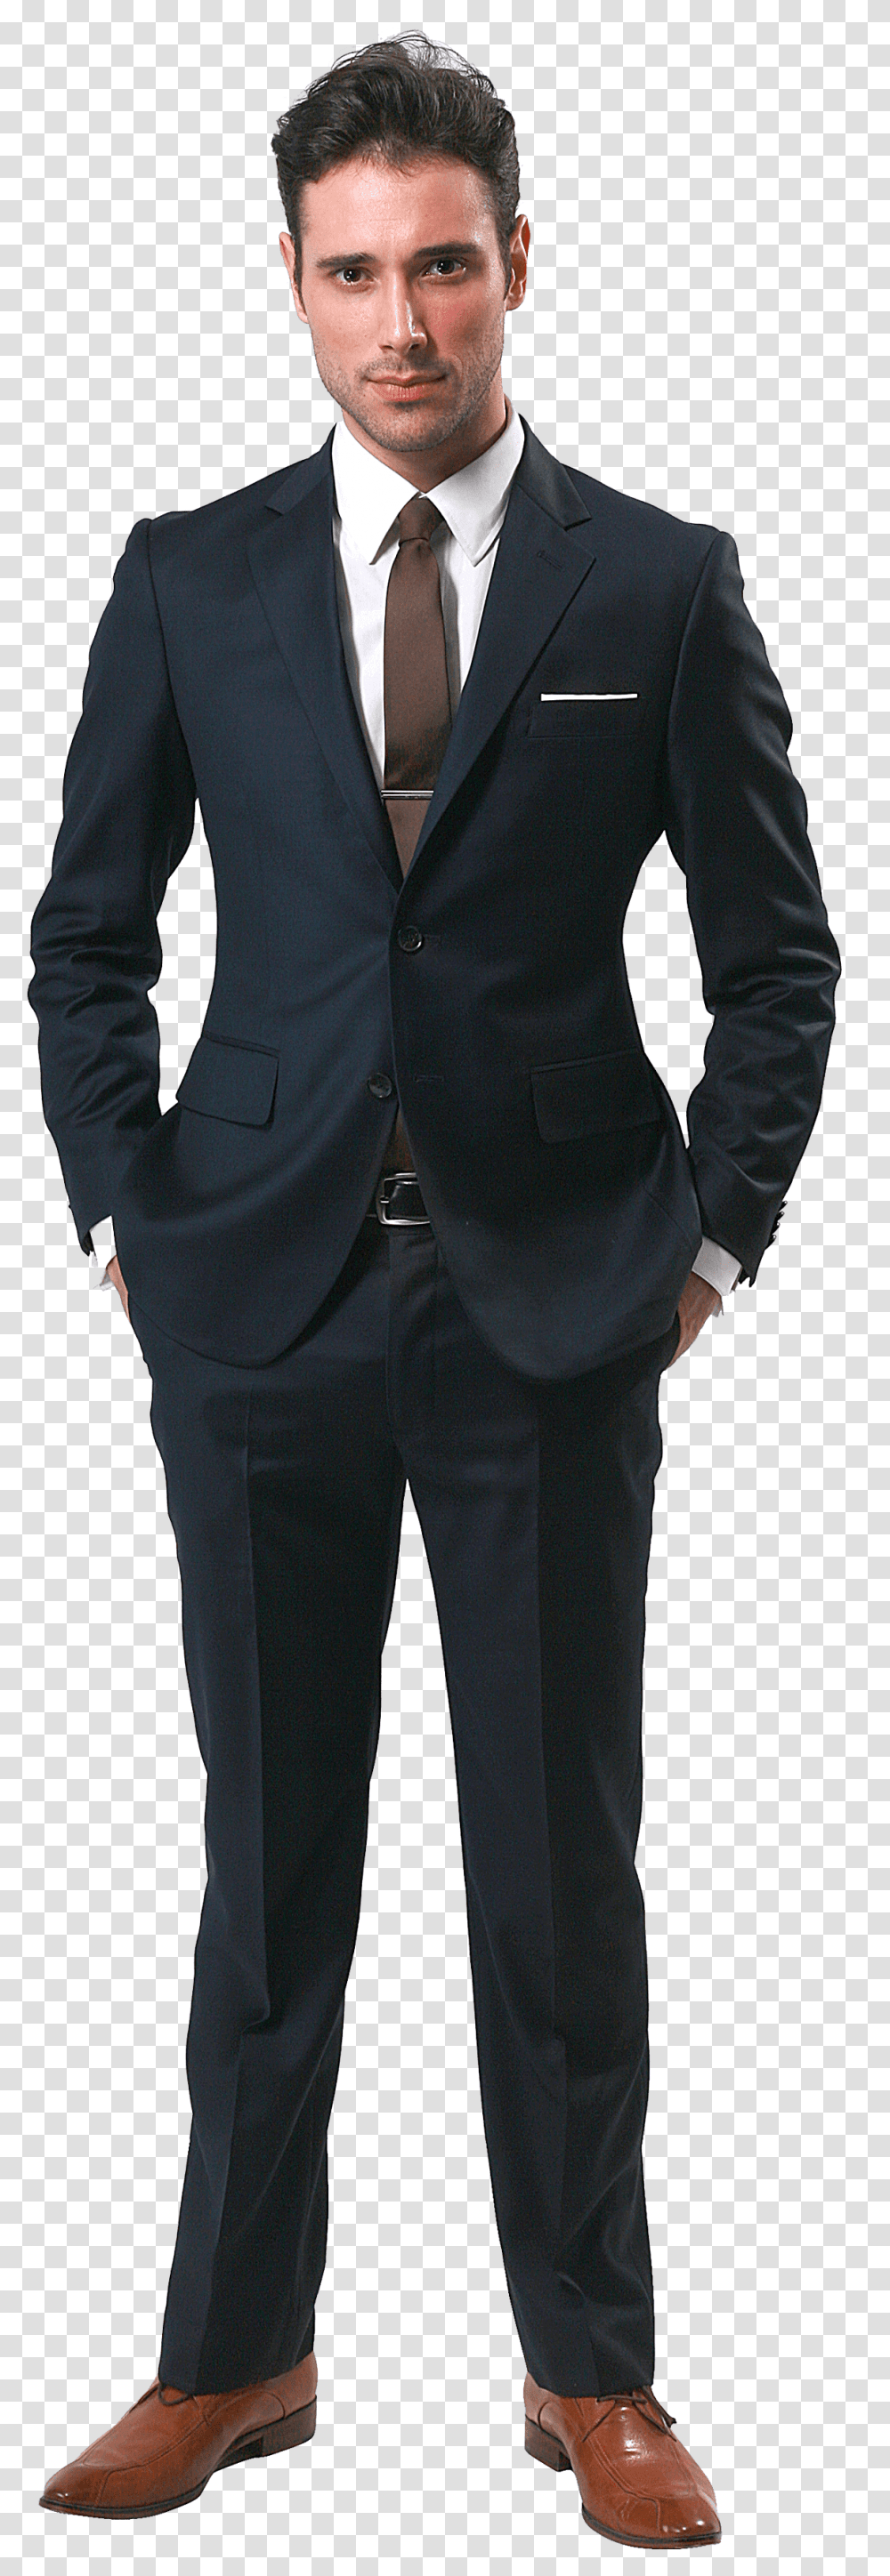 Business Man Free Image Download Background Businessman, Suit, Overcoat, Person Transparent Png